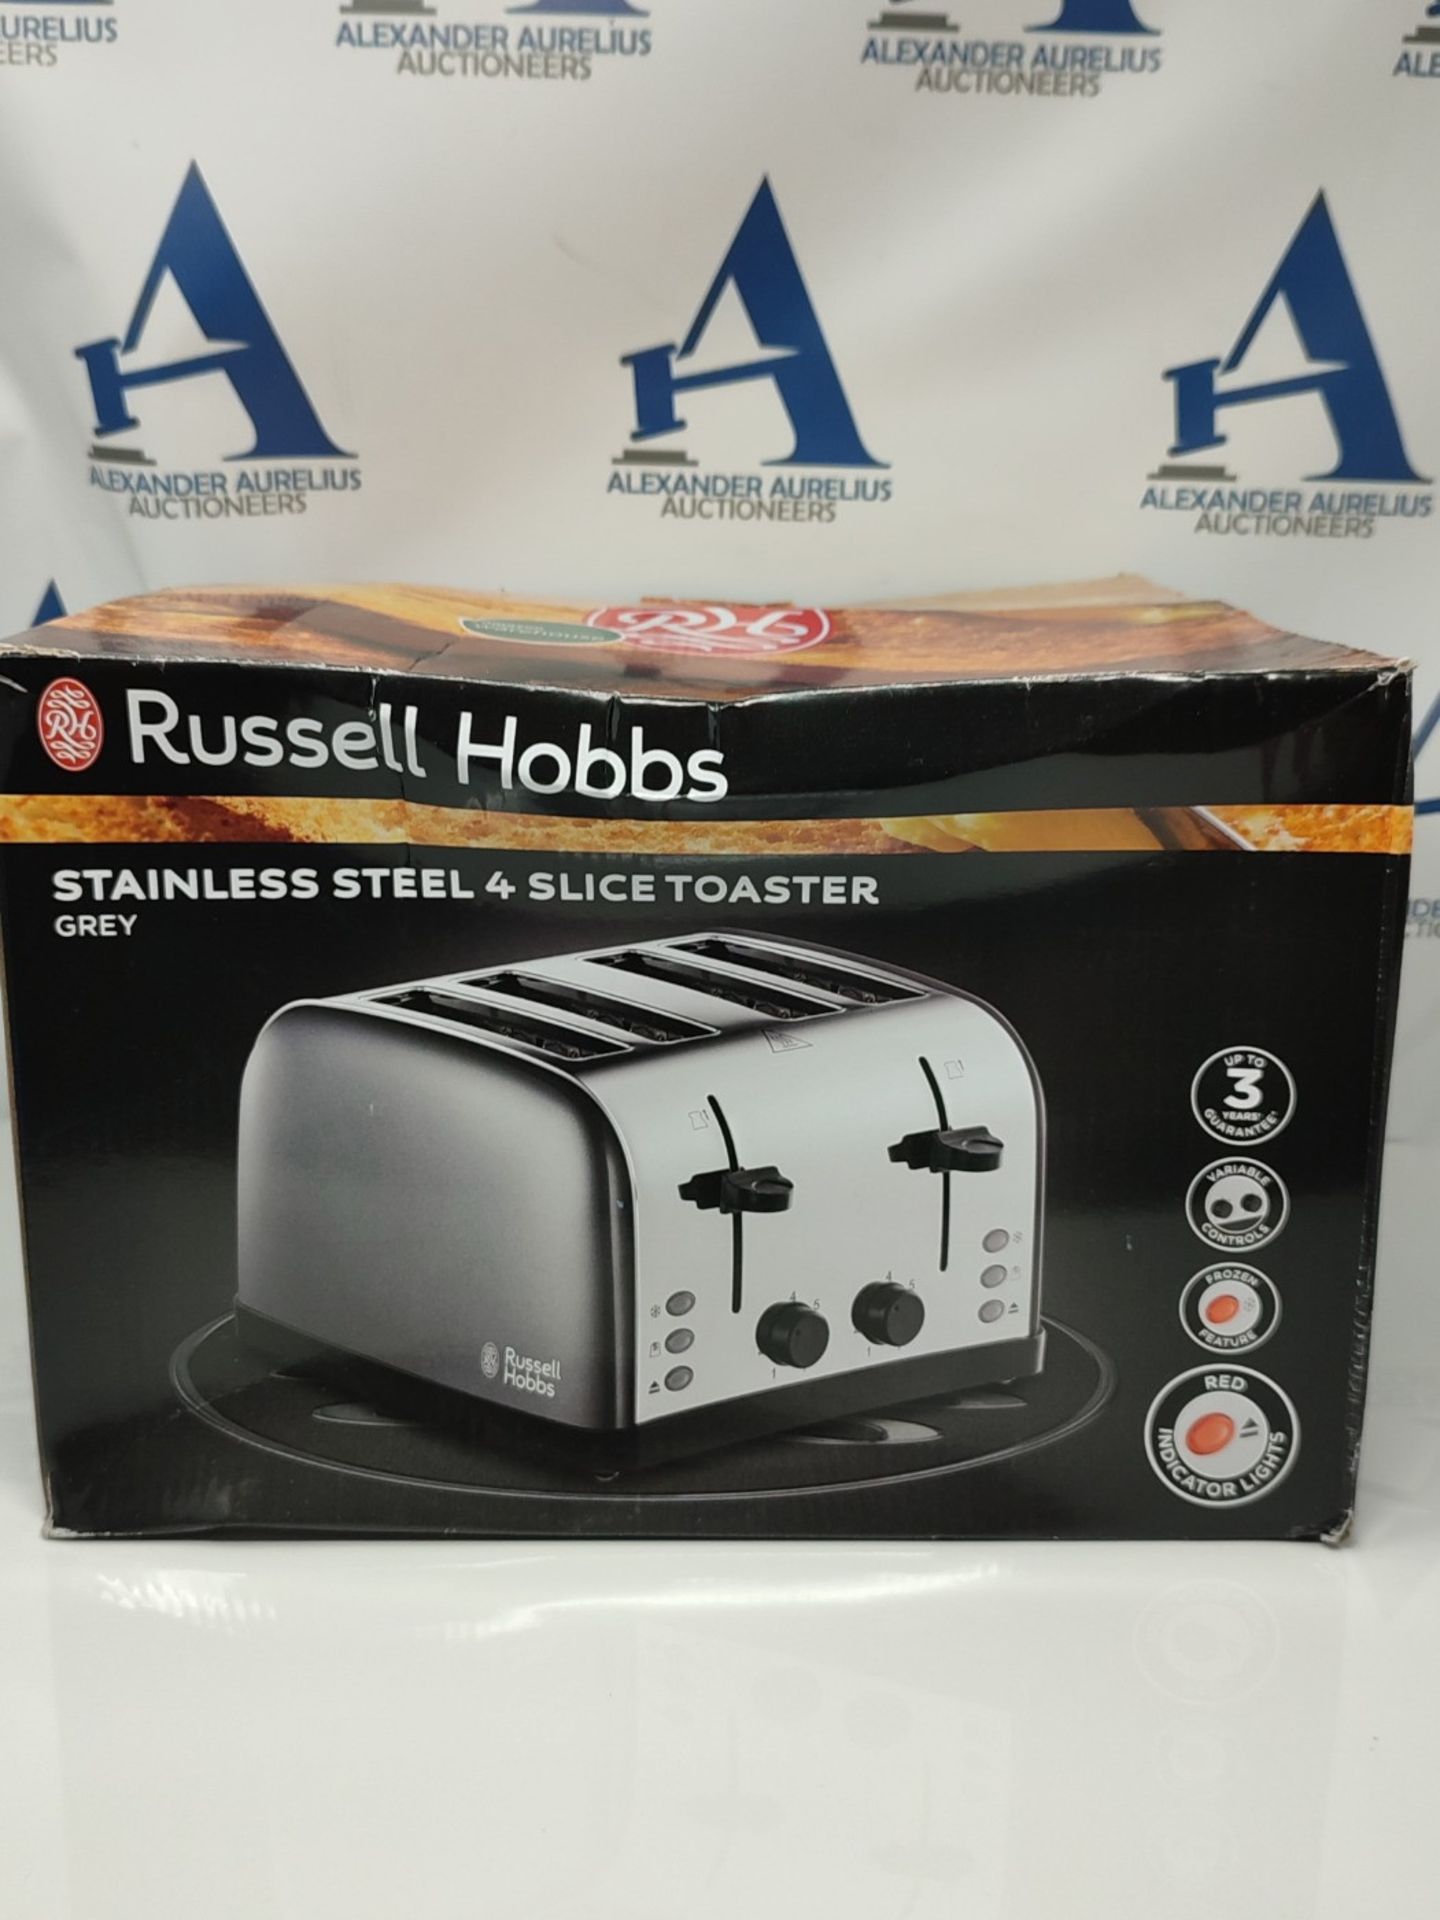 Russell Hobbs 28364 Stainless Steel Toaster, 4 Slice with Variable Browning Settings a - Image 2 of 3